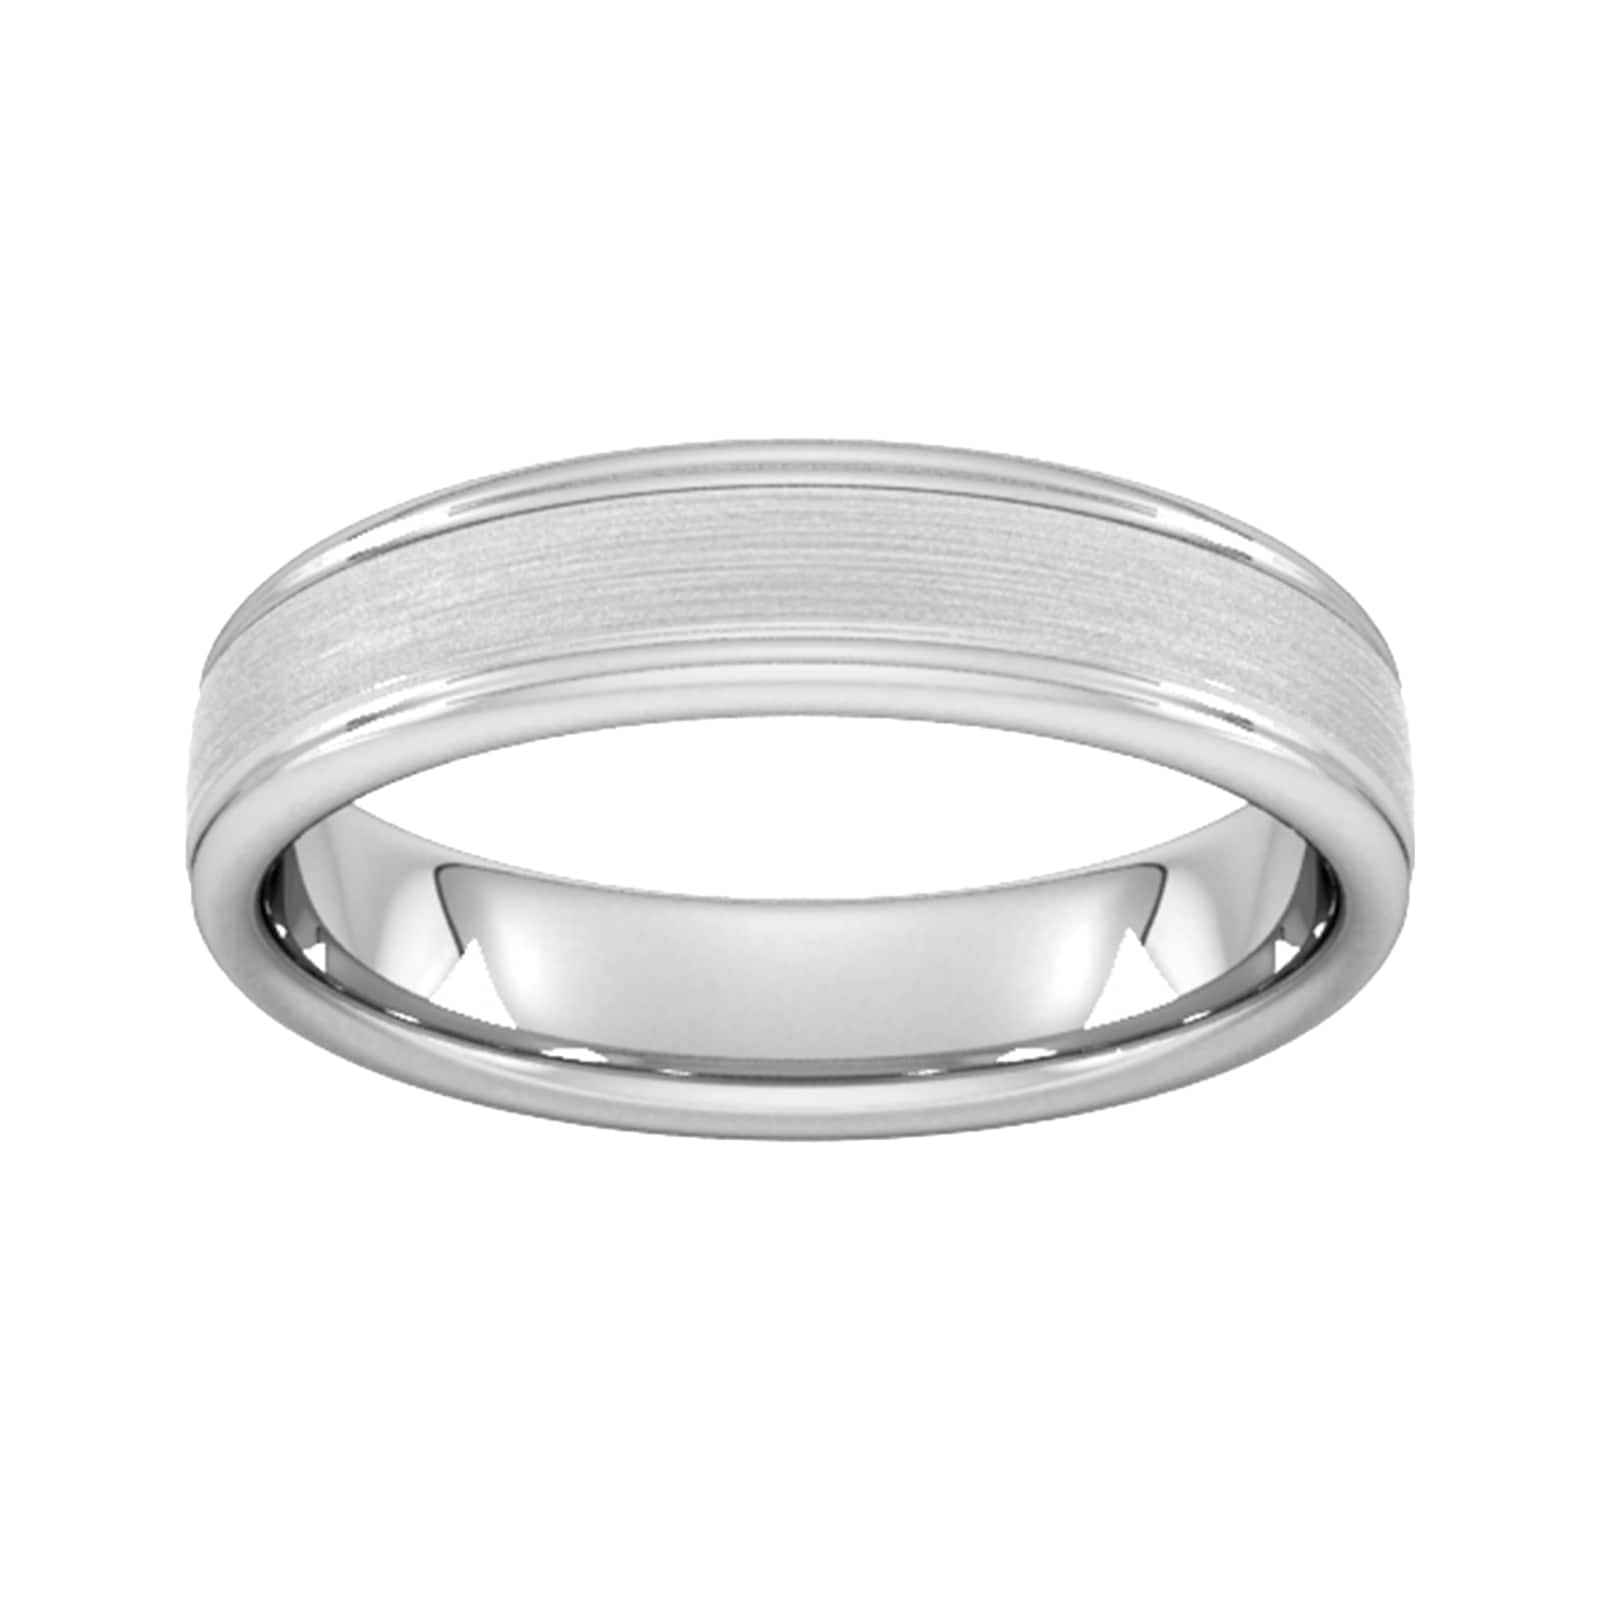 5mm Traditional Court Standard Matt Centre With Grooves Wedding Ring In 950 Palladium - Ring Size J